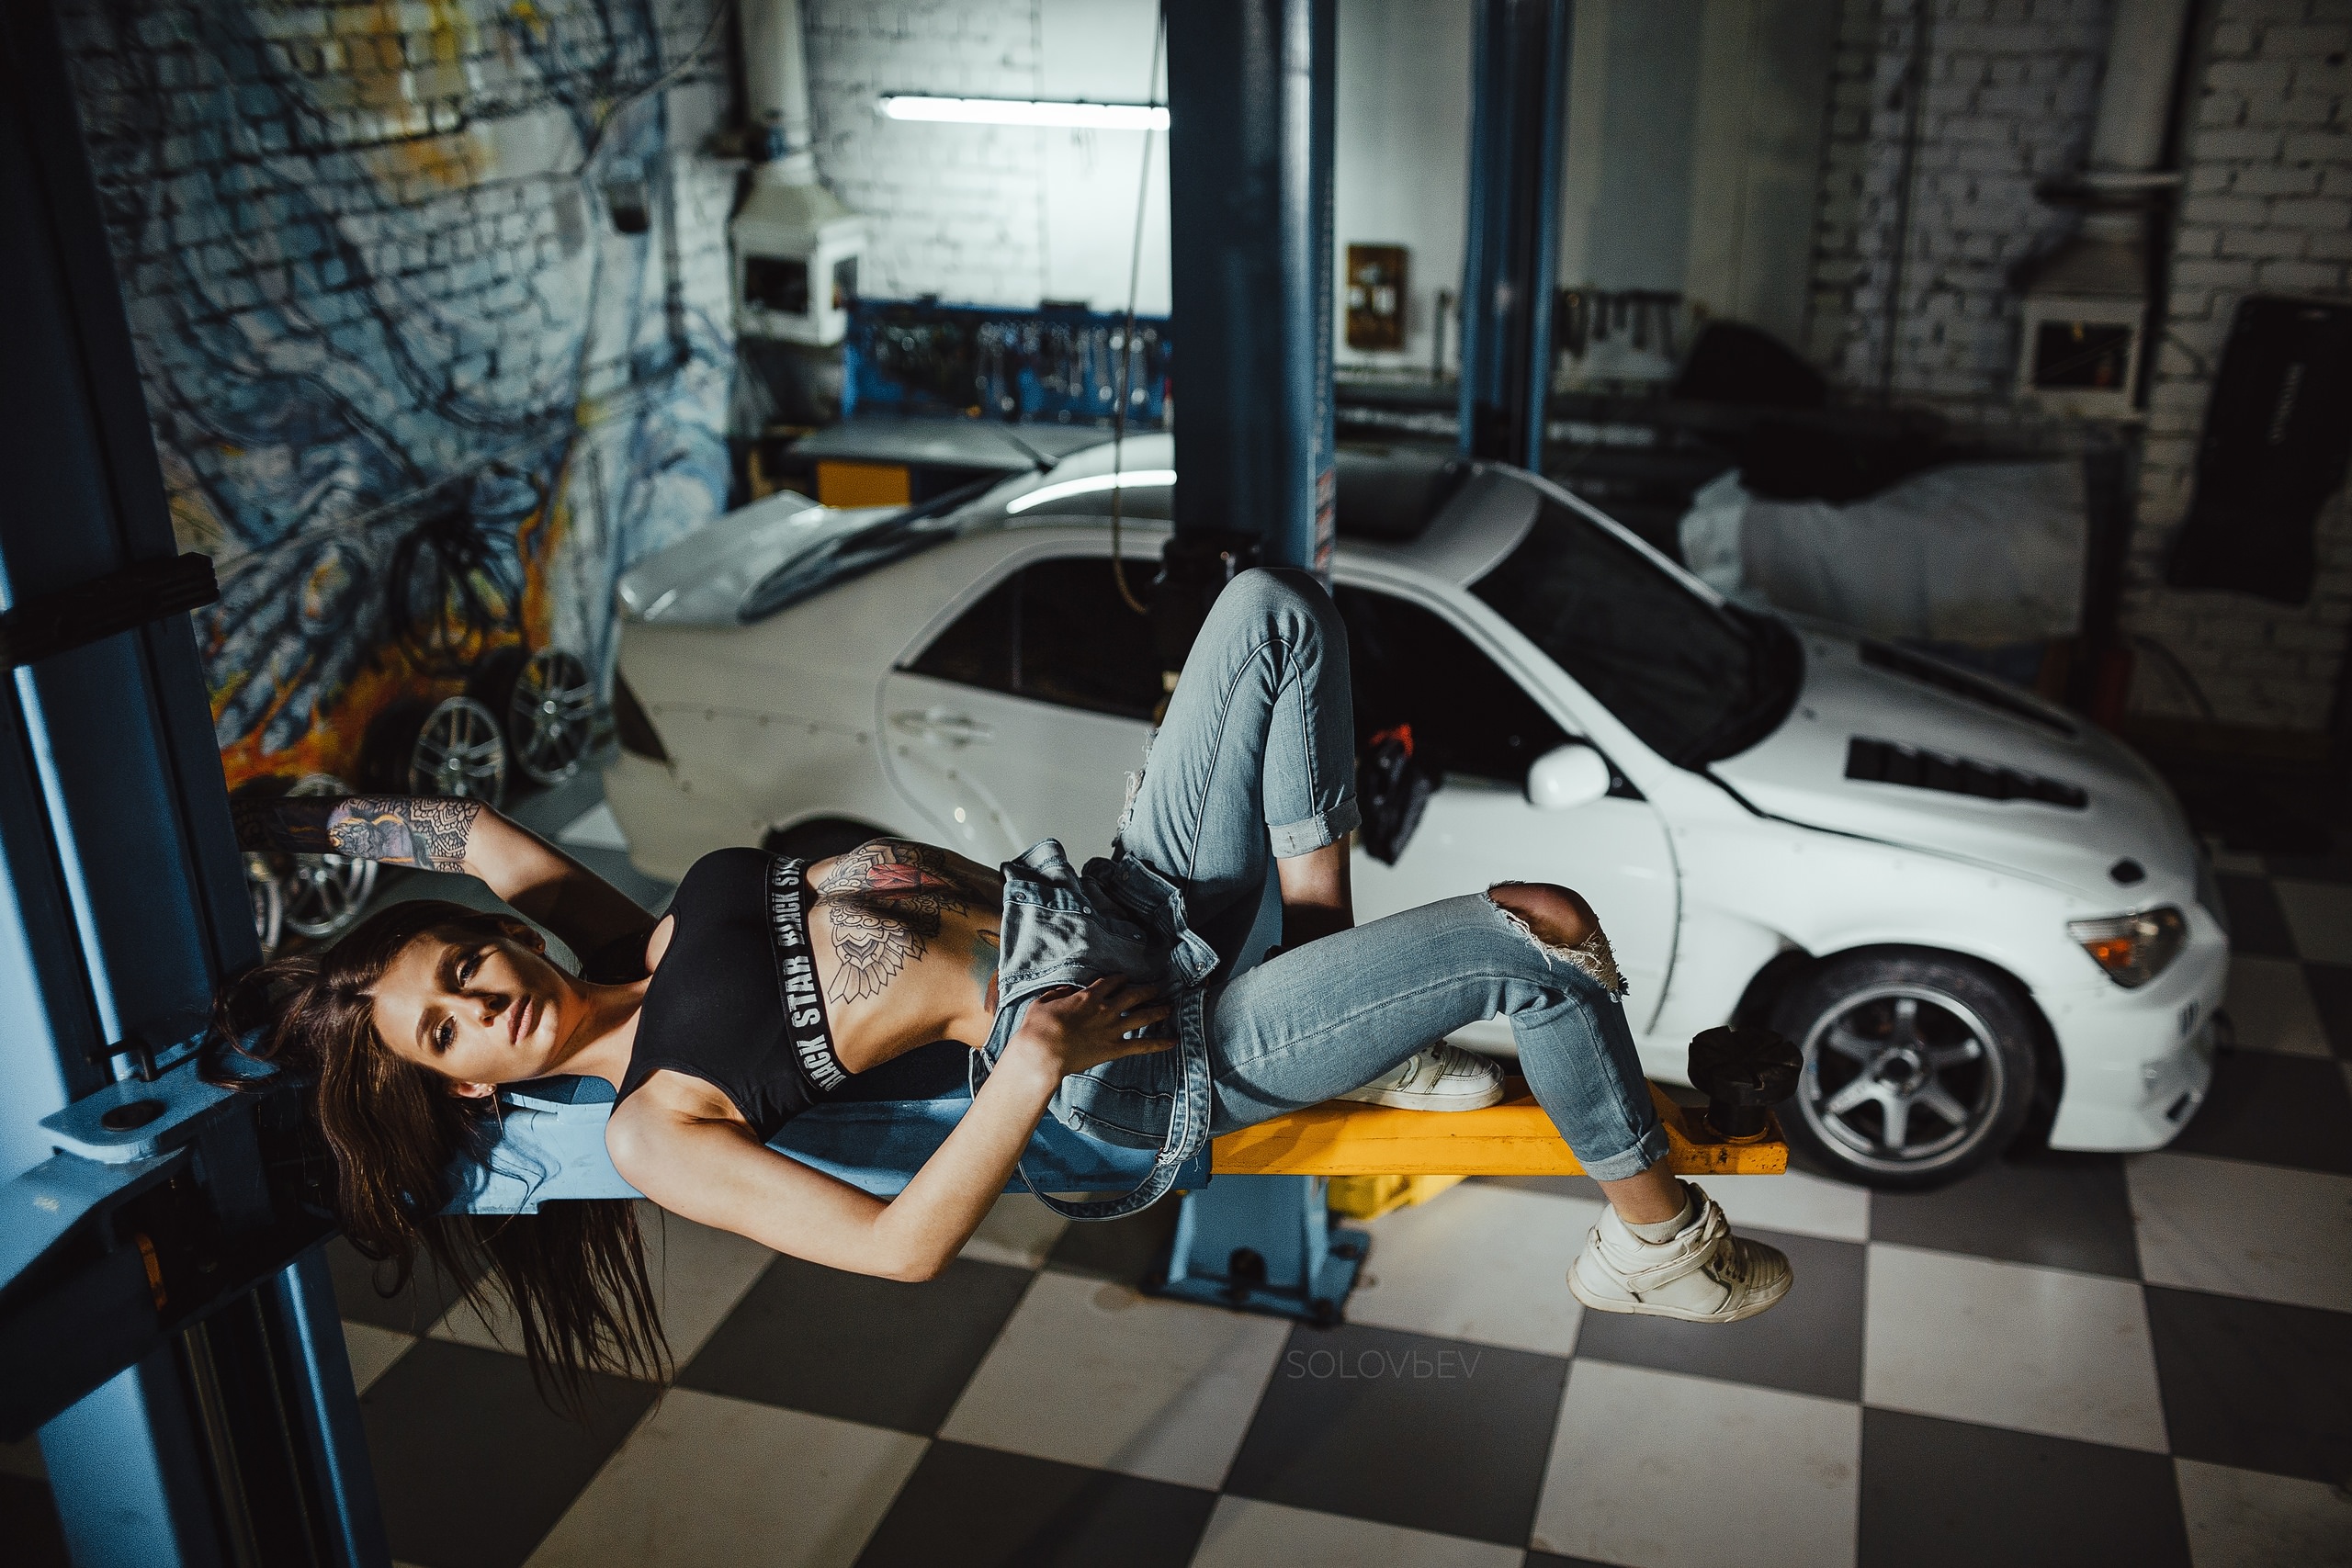 Women Artem Solov Ev Garage Sneakers Women With Cars Overalls Torn Clothes Ribs Black Top 2560x1707